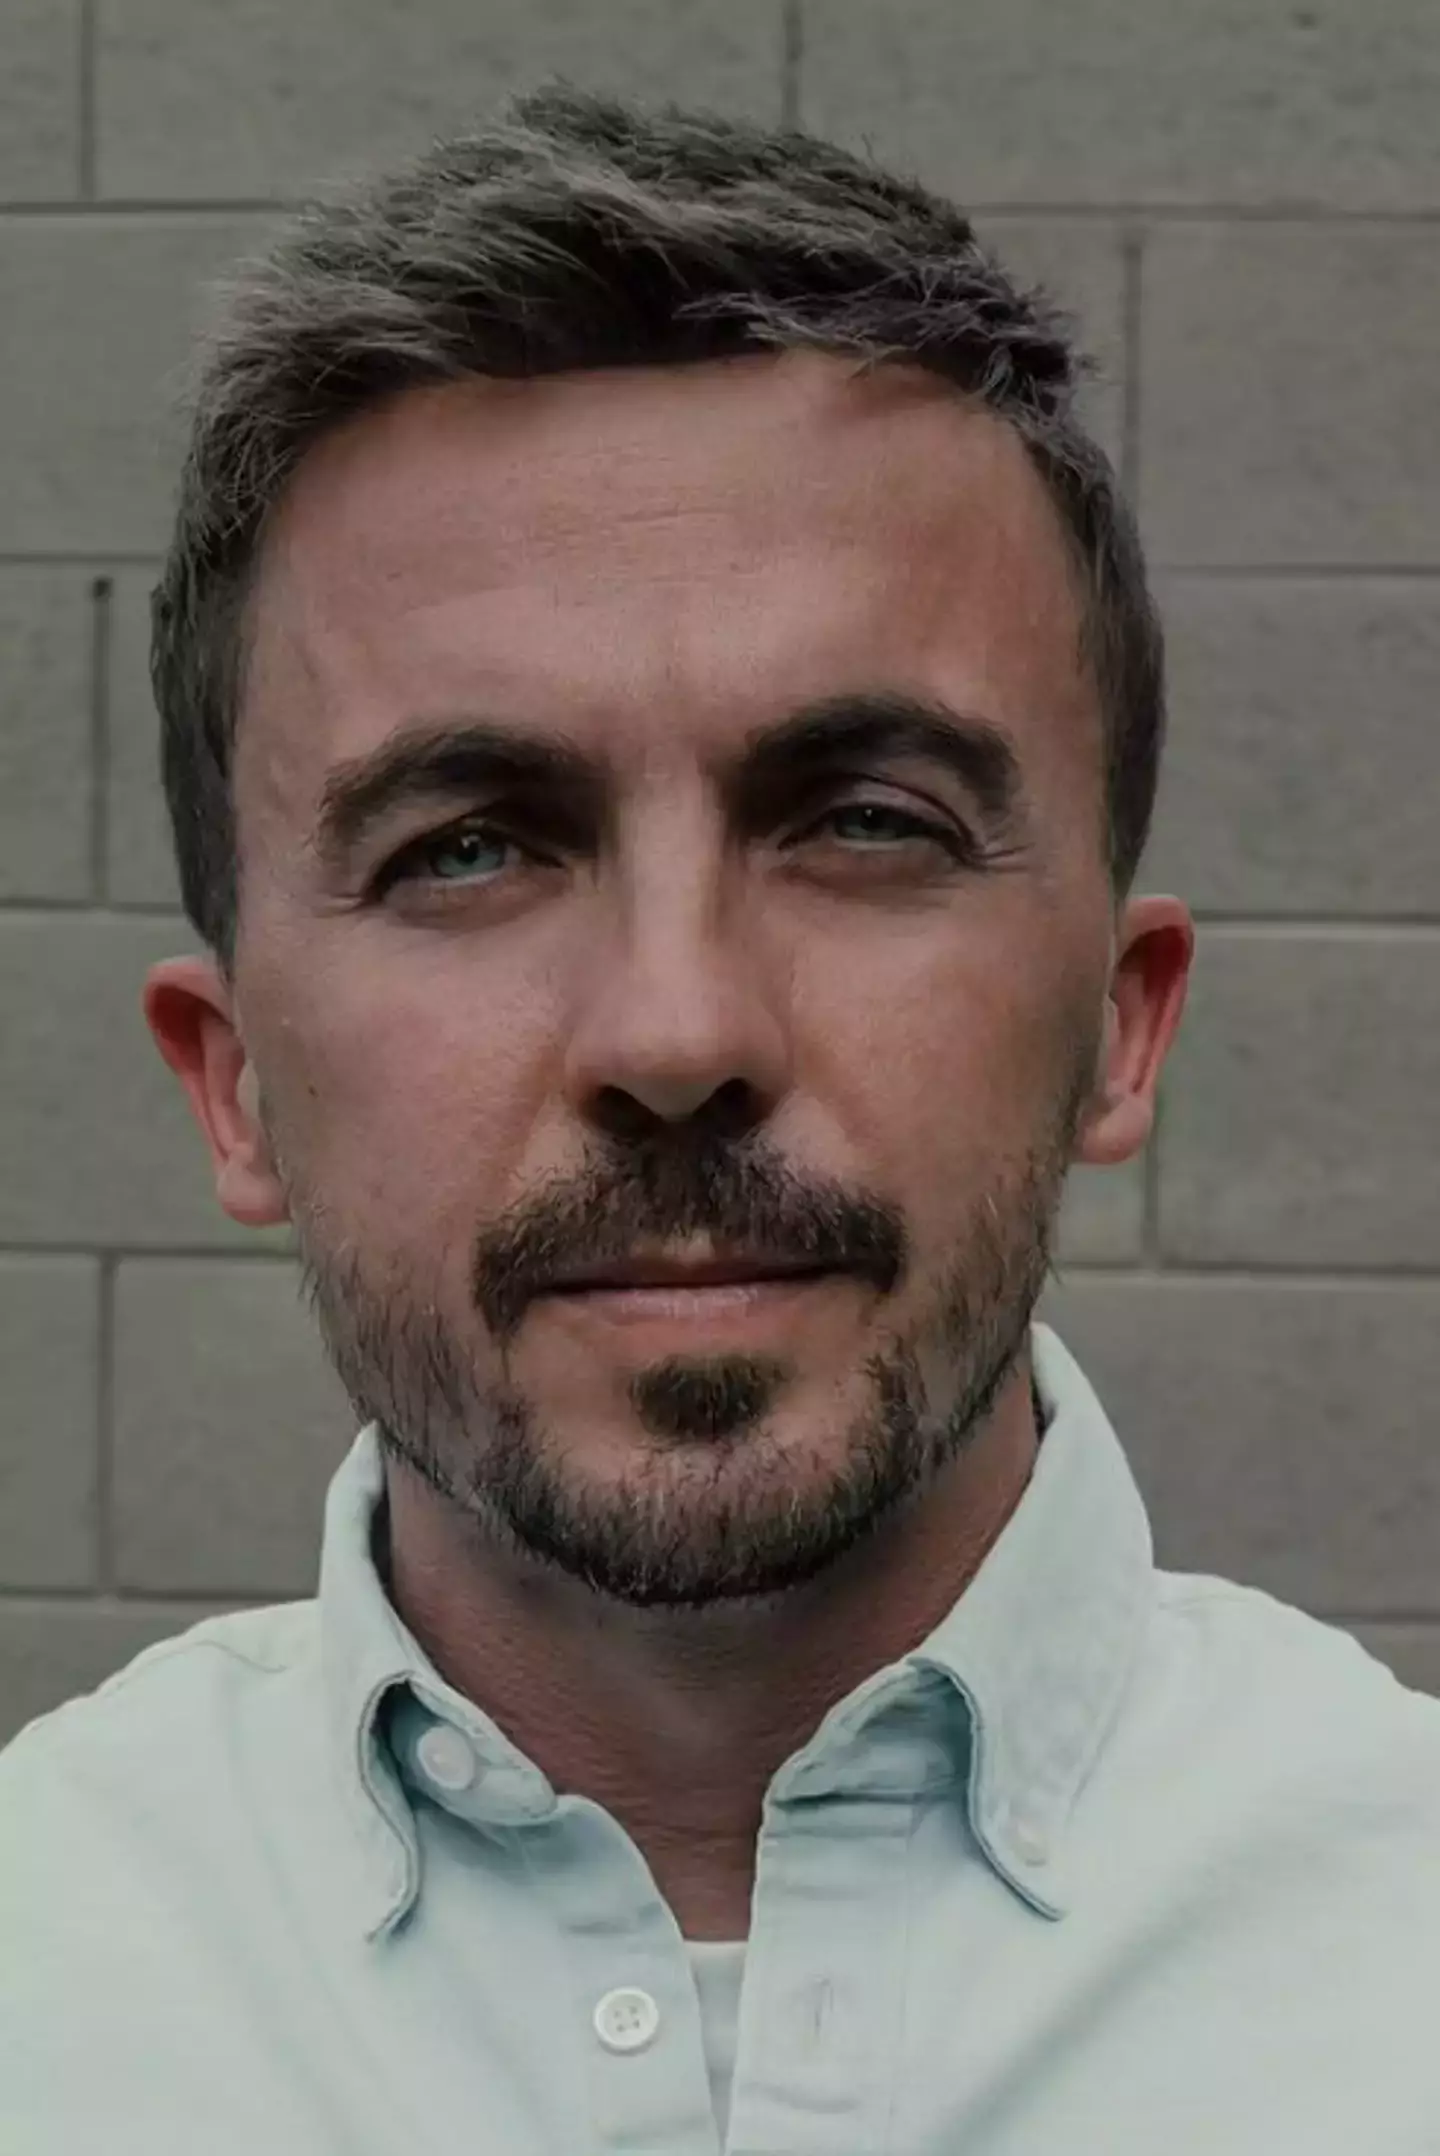 Frankie Muniz is best known for starring in Malcolm in the Middle.